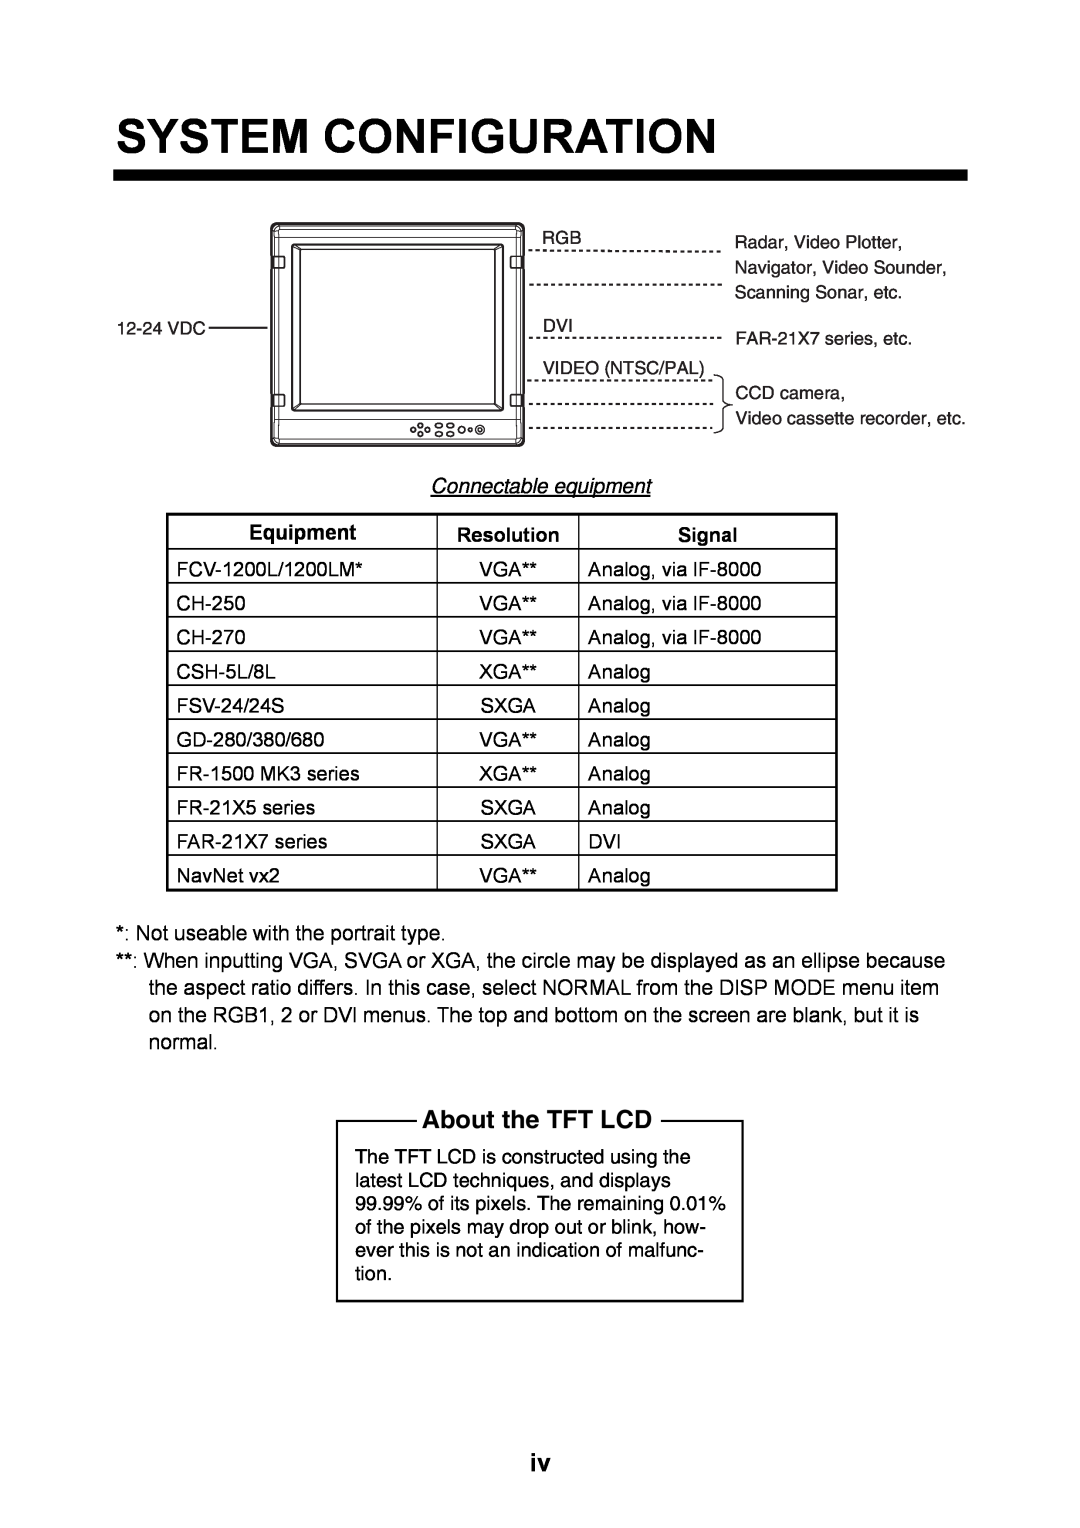 Furuno MU-170C manual System Configuration, About the TFT LCD, Equipment, Resolution, Signal 